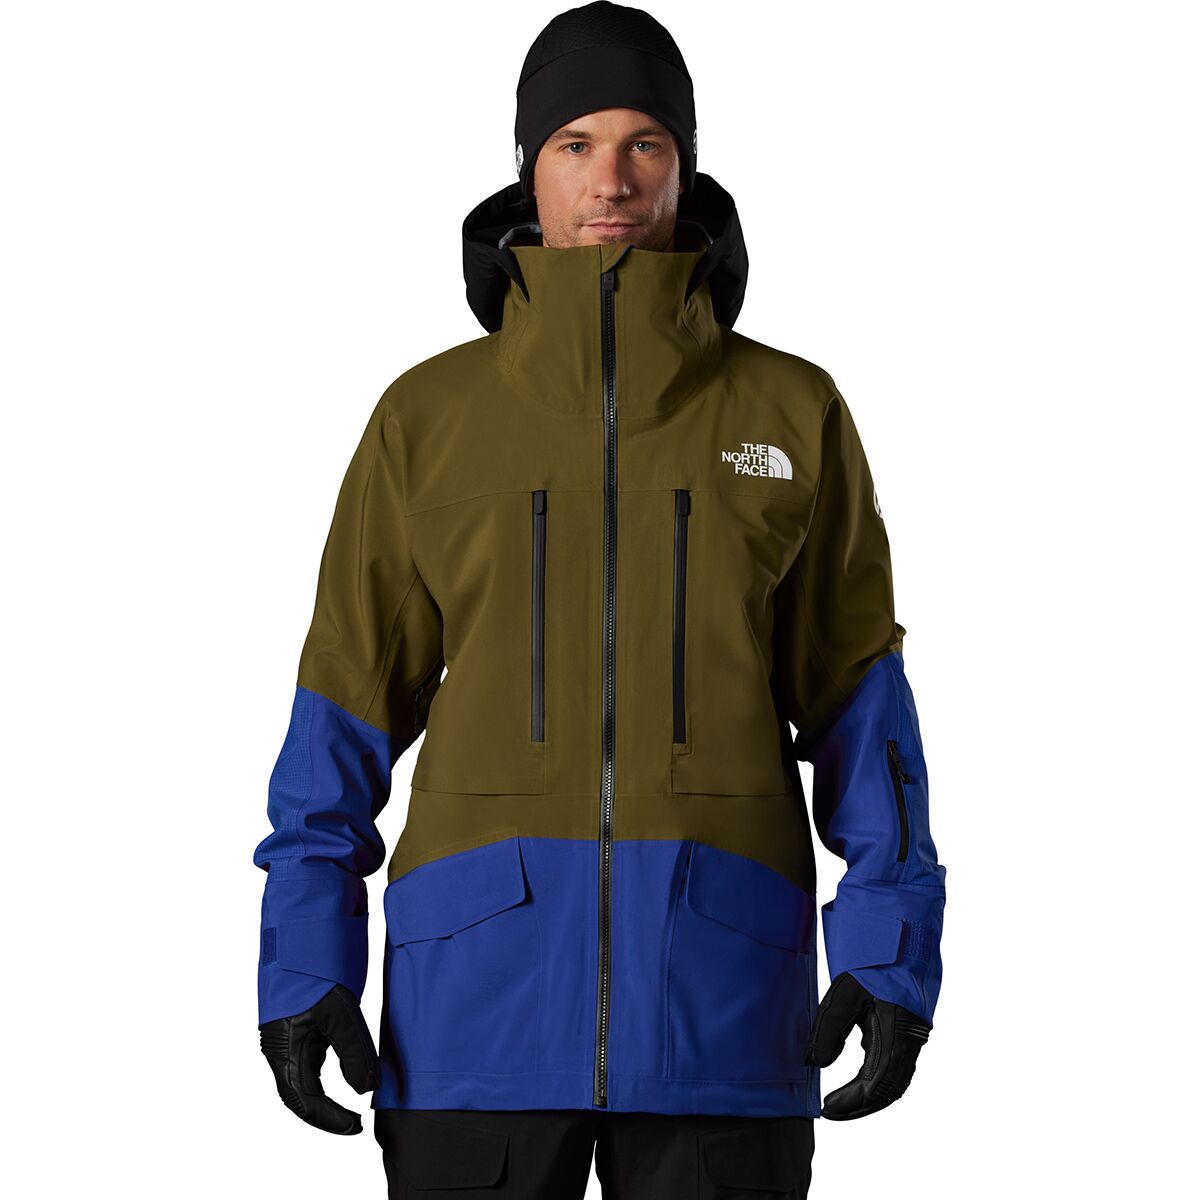 The North Face Ski Clothing | Backcountry.com